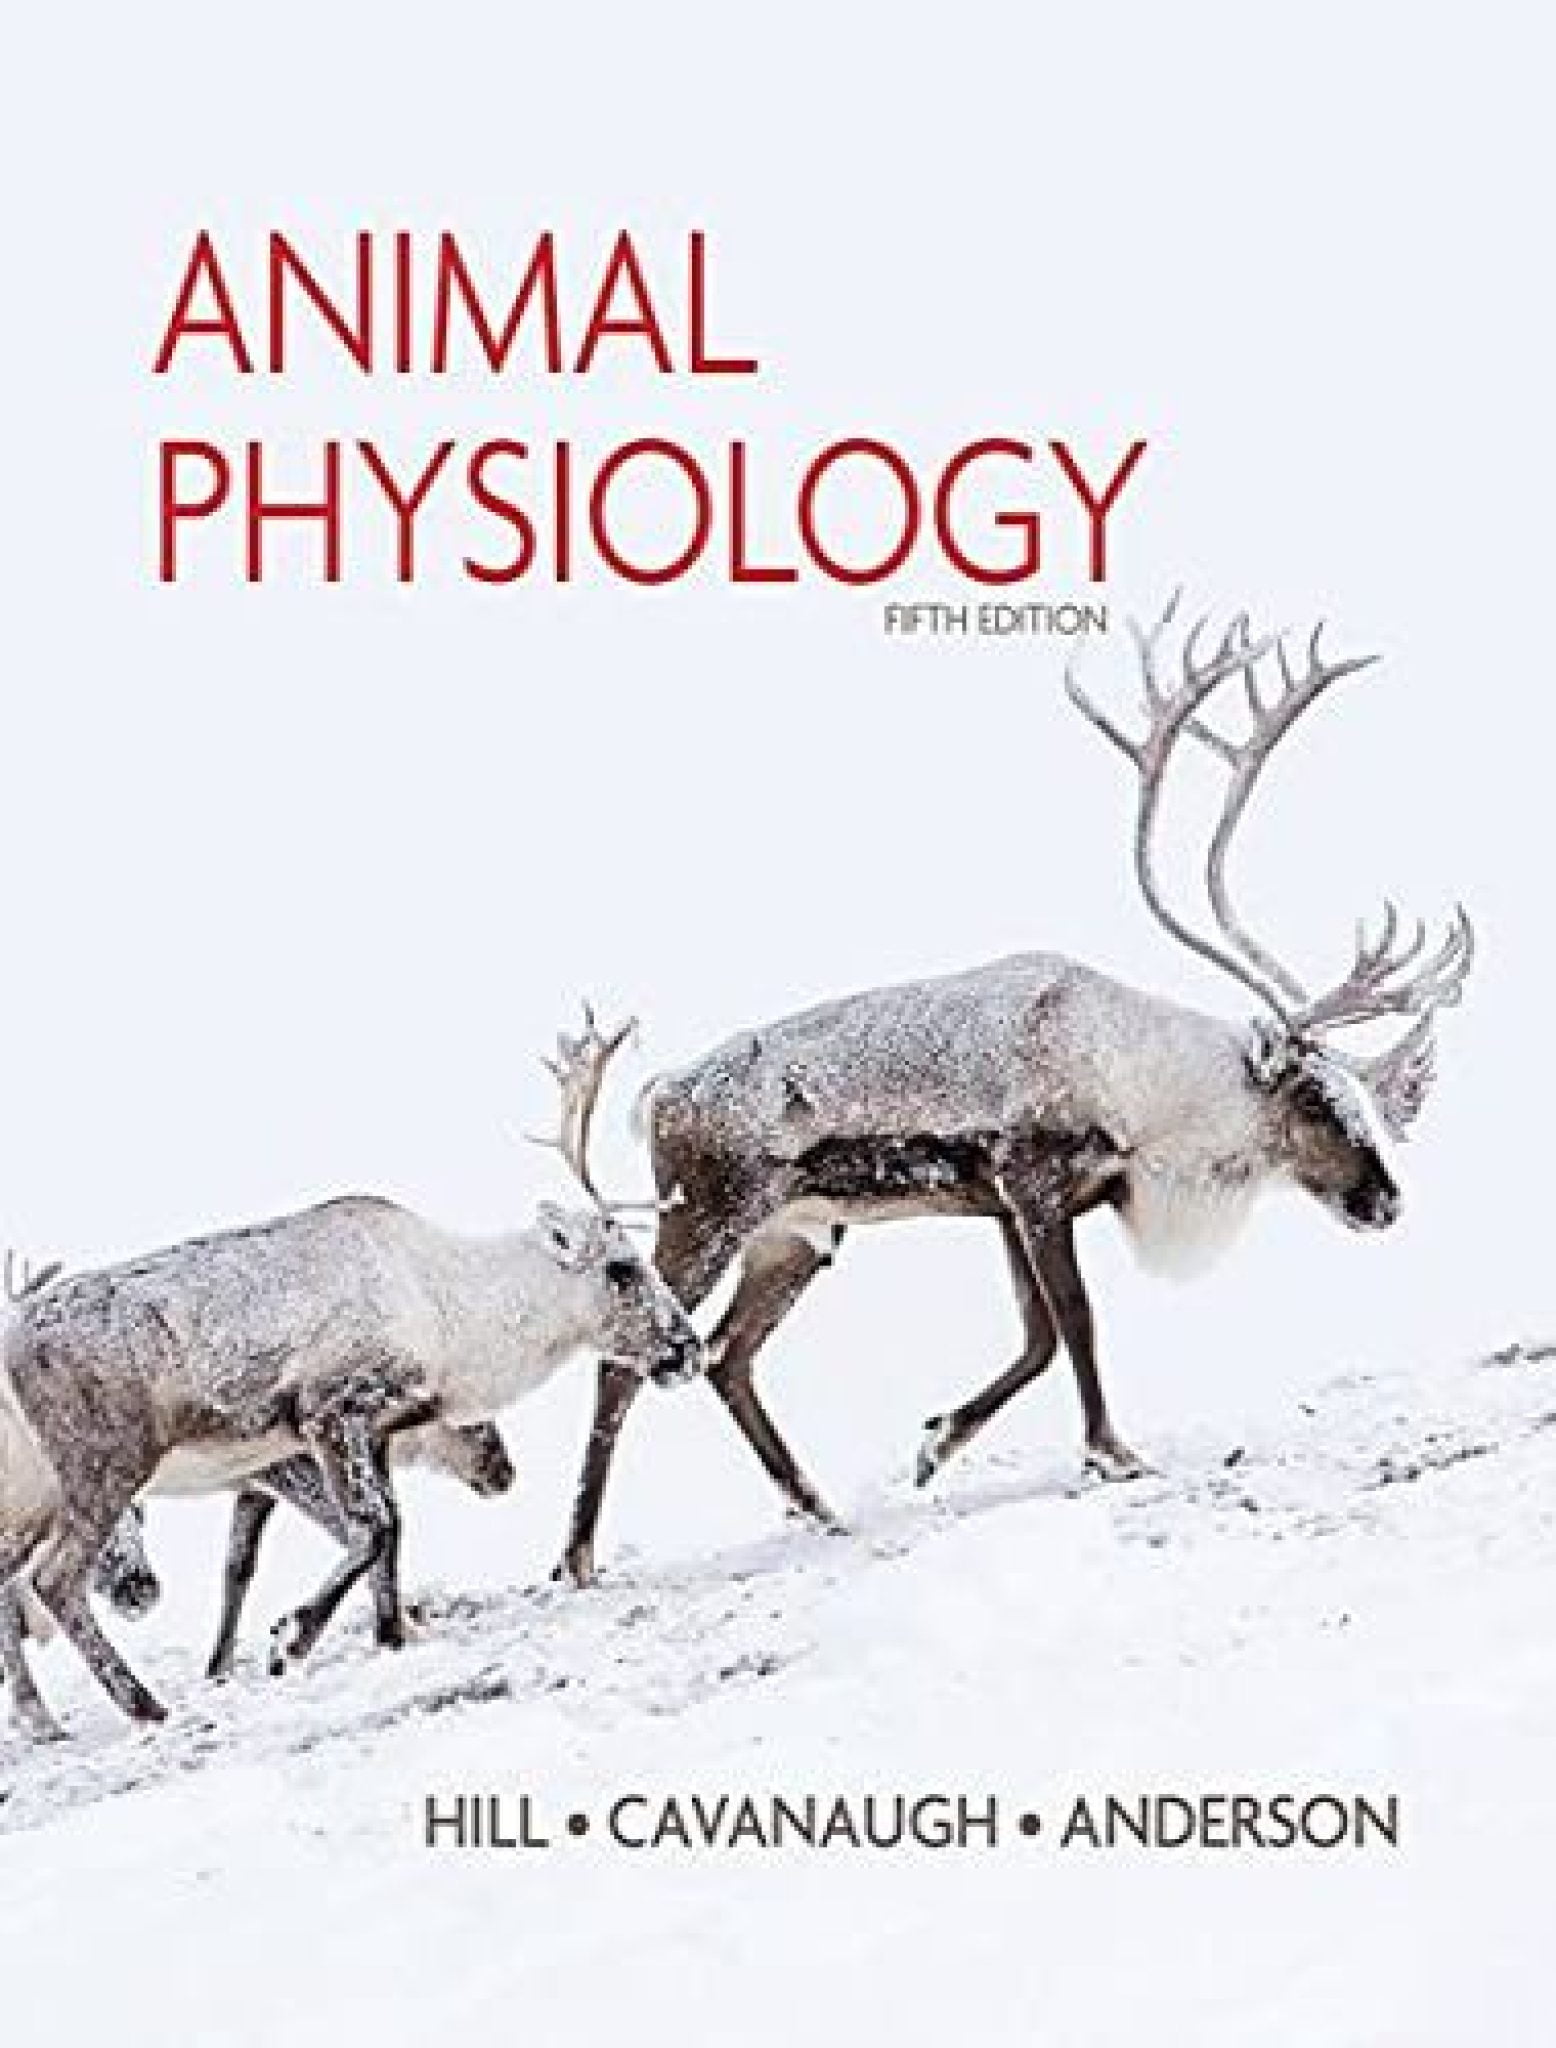 animal physiology research papers